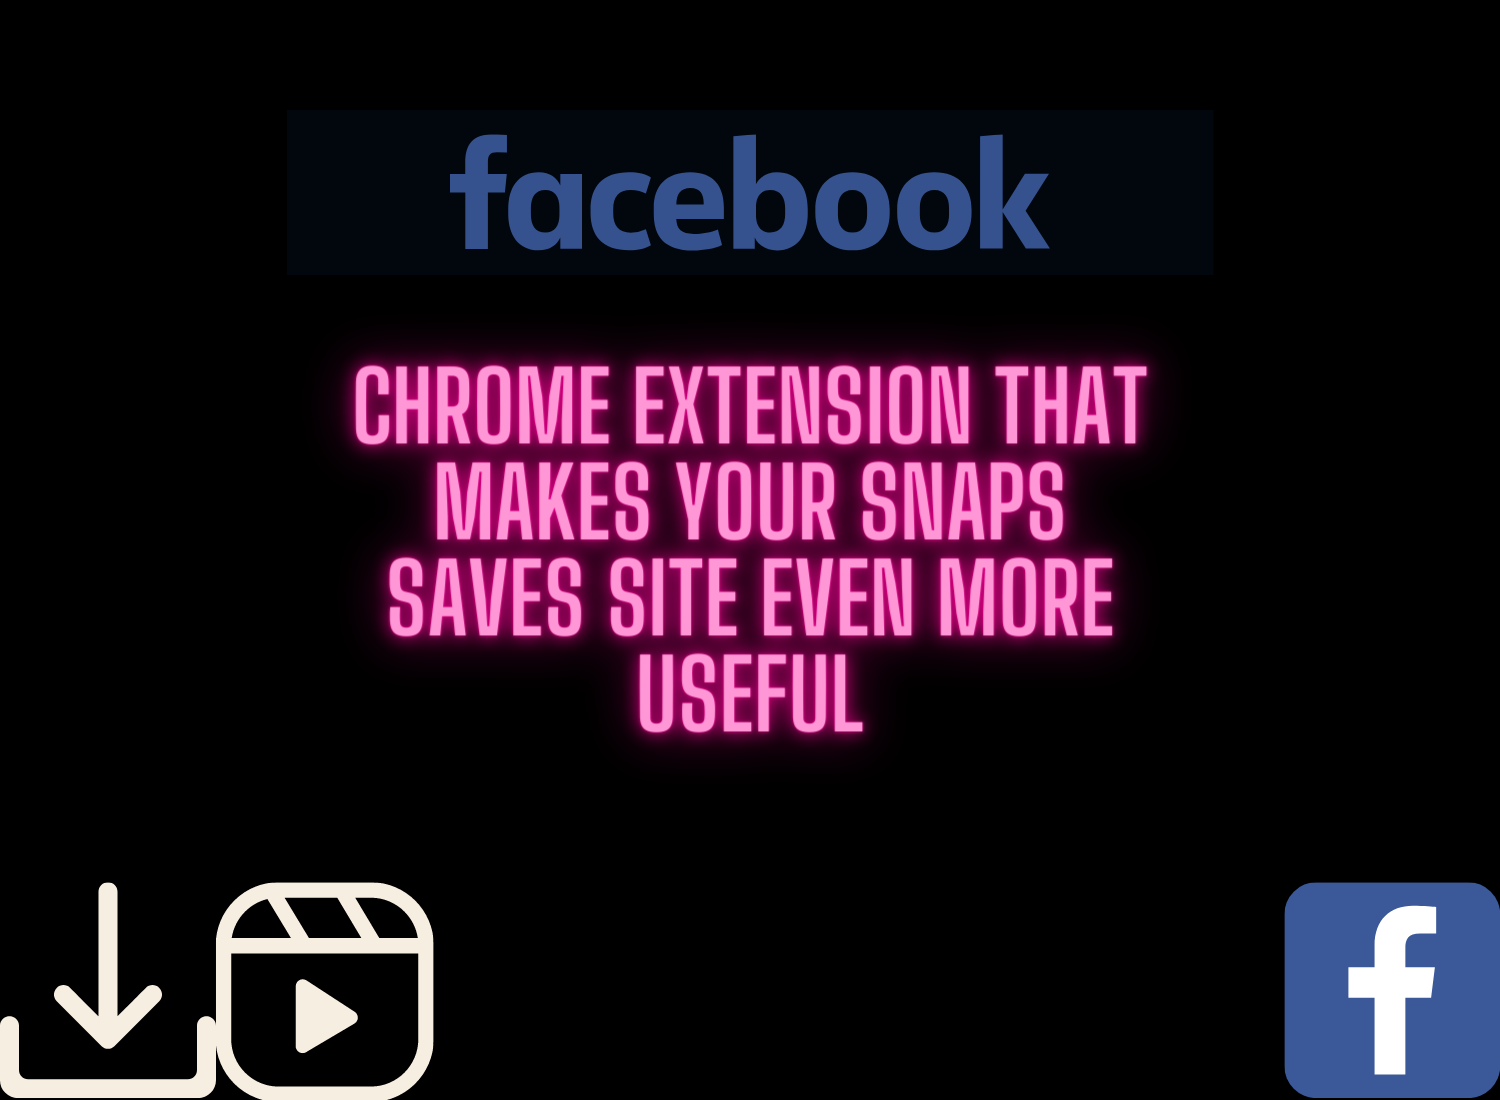 Chrome Extension That Makes Your Snaps Saves Site Even More Useful